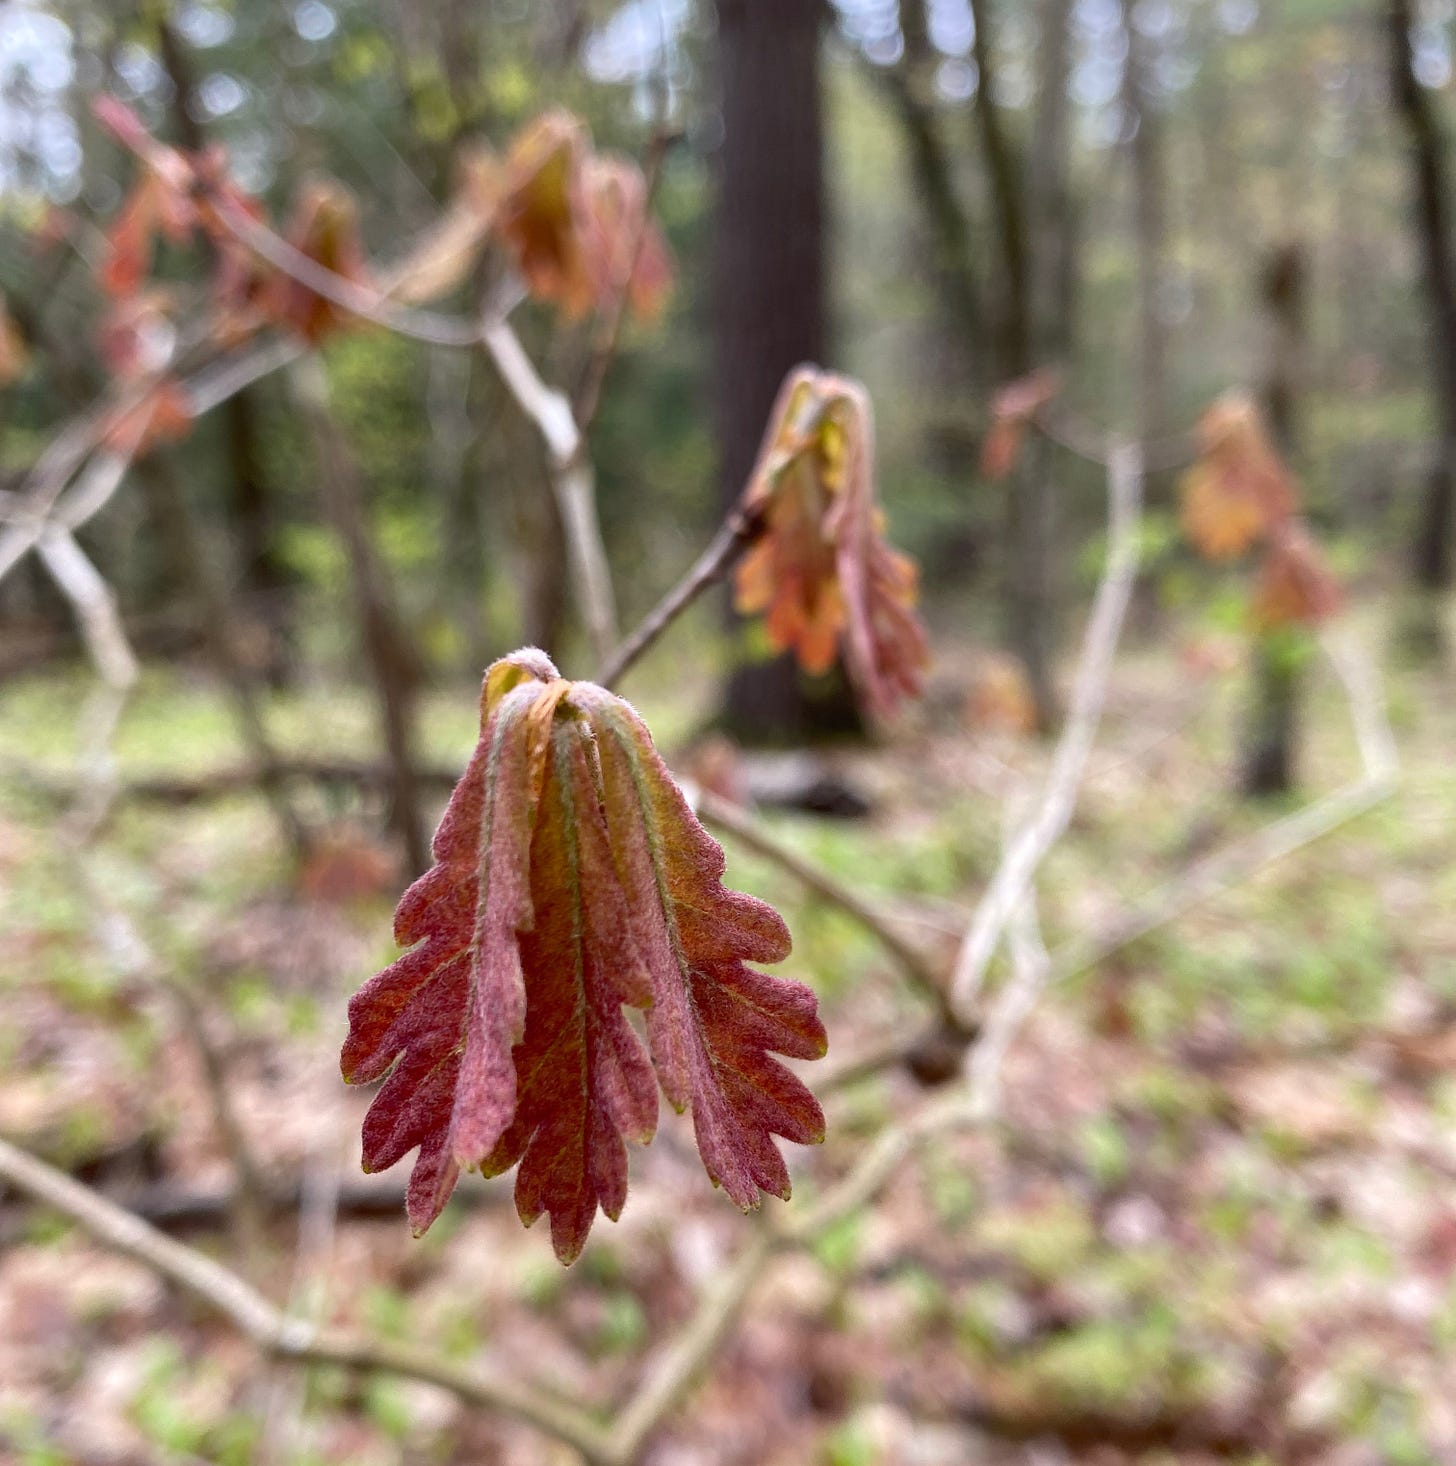 Closeup of a cluster of tiny, fuzzy, new red oak leaves. The forest in the background is a blur of green and brown.